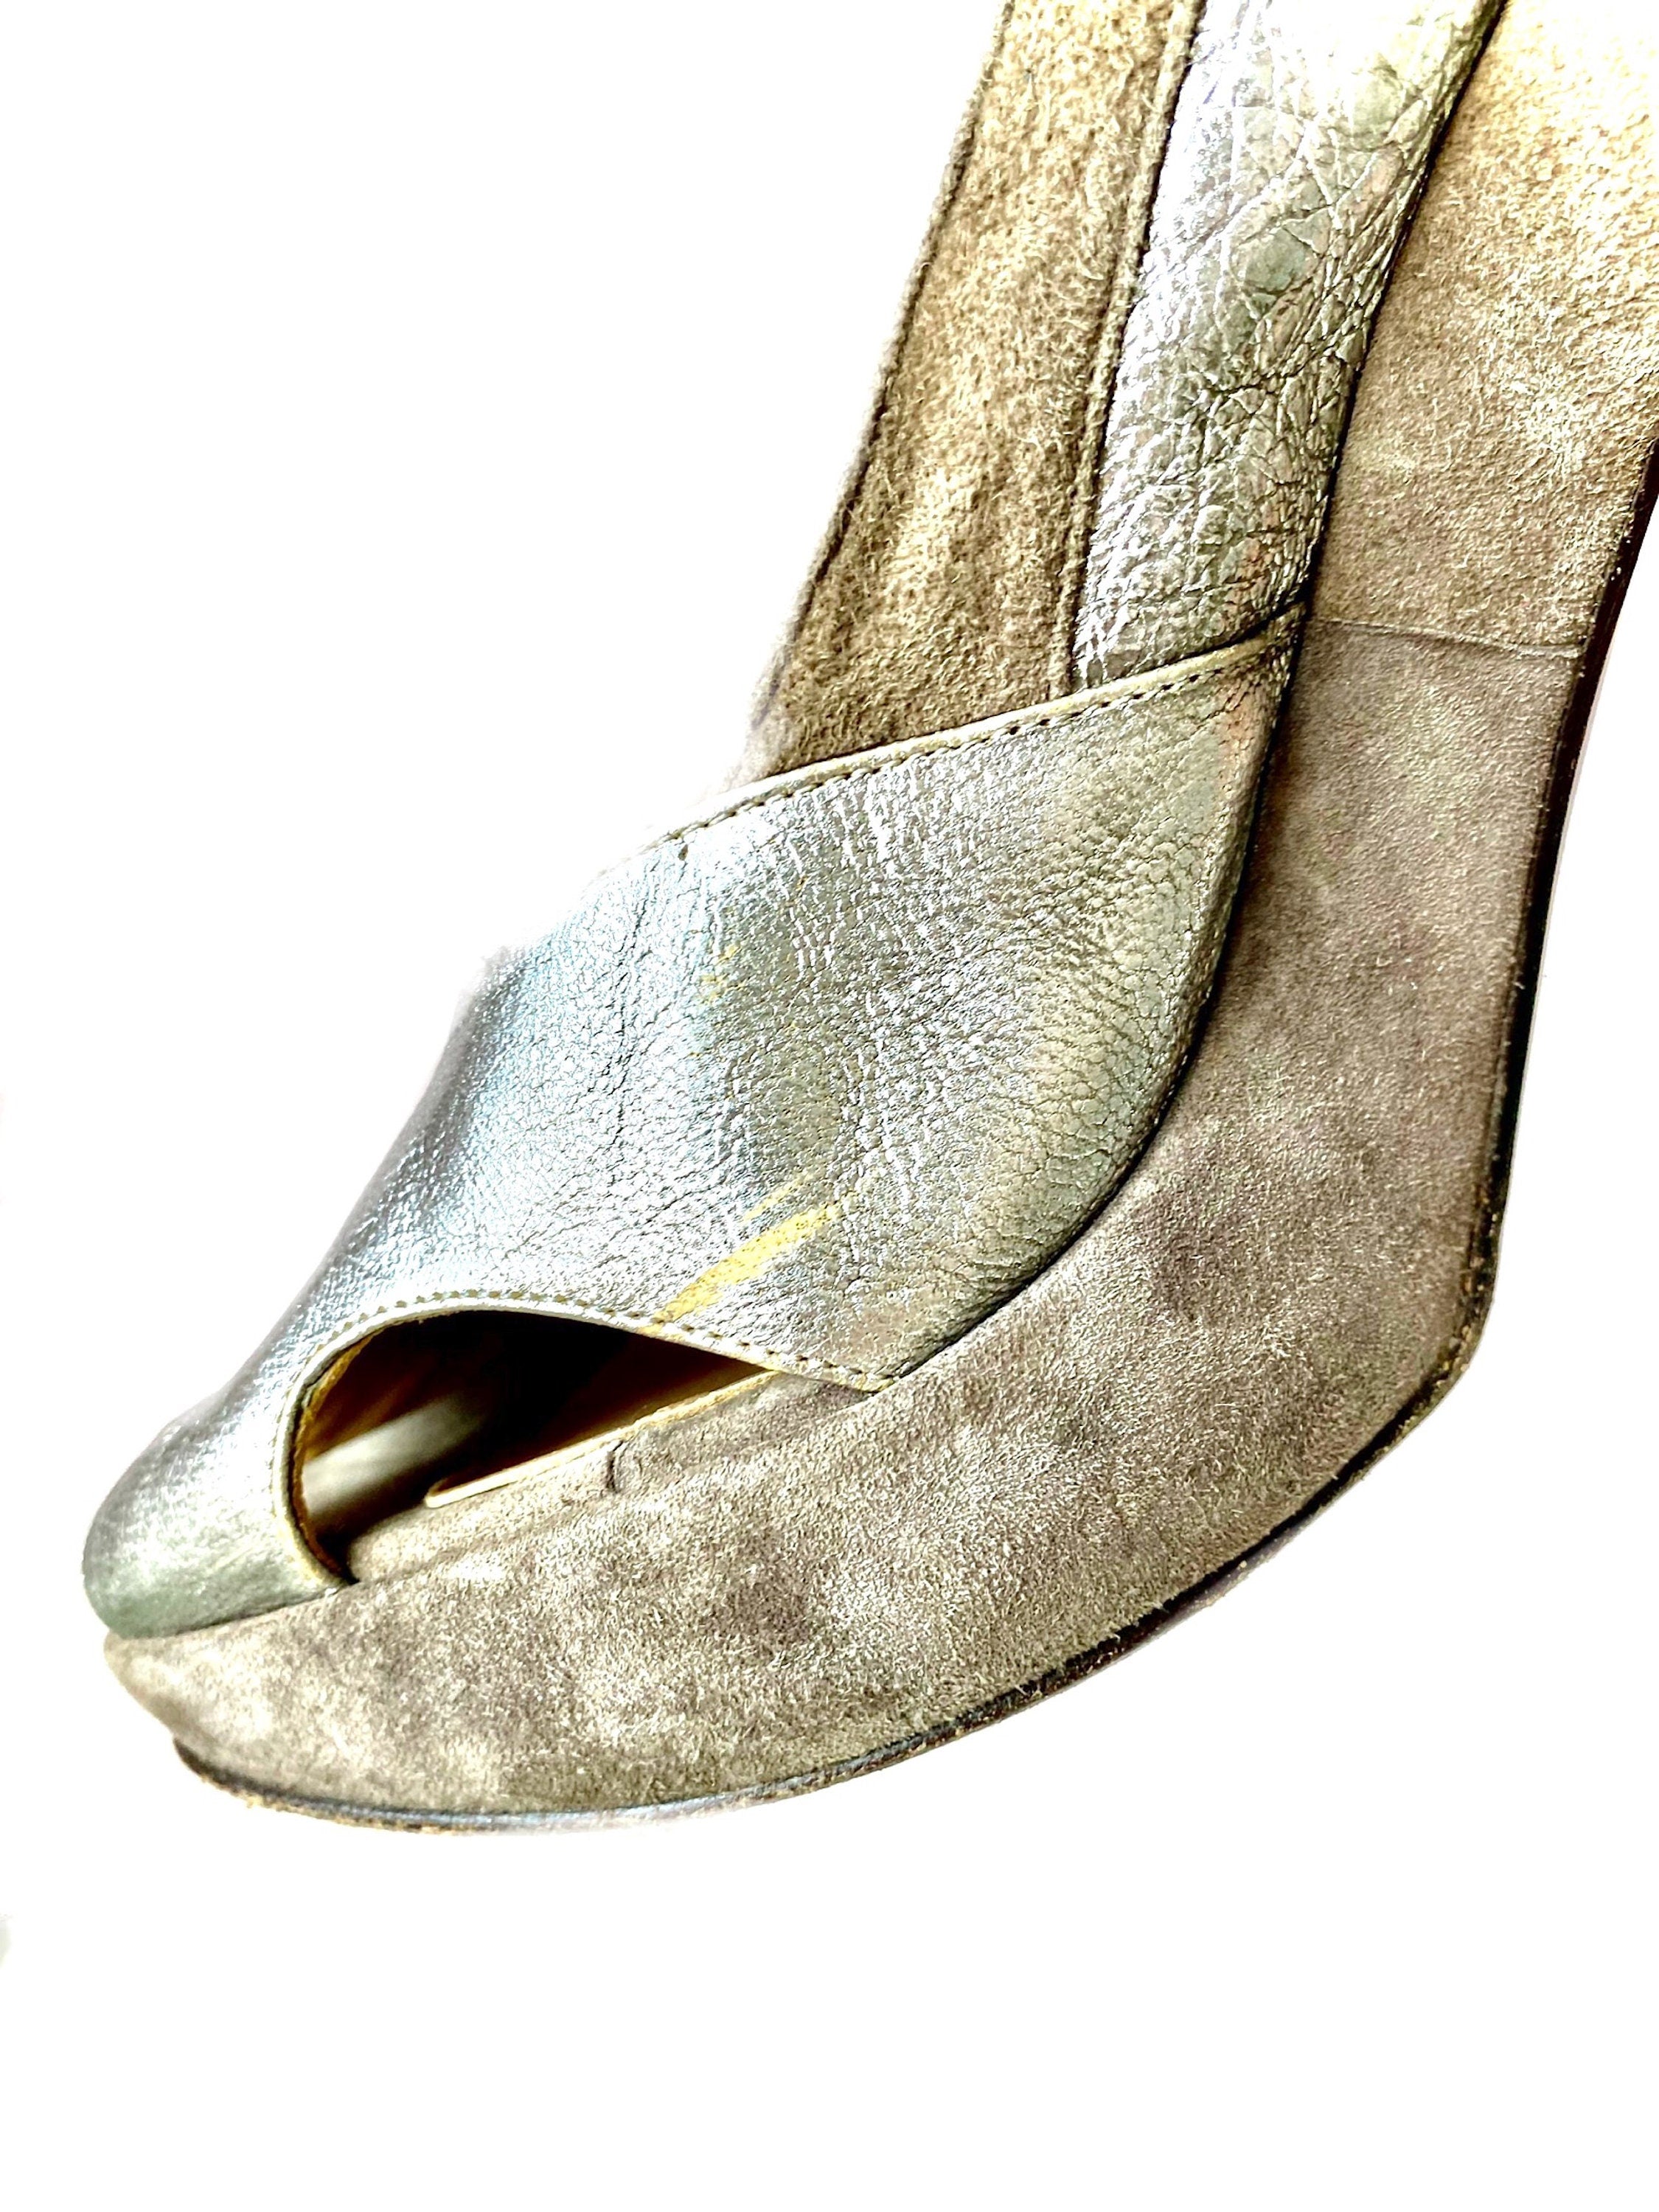 Vintage Marni chunky heel platform silver and taupe glam suede slingback